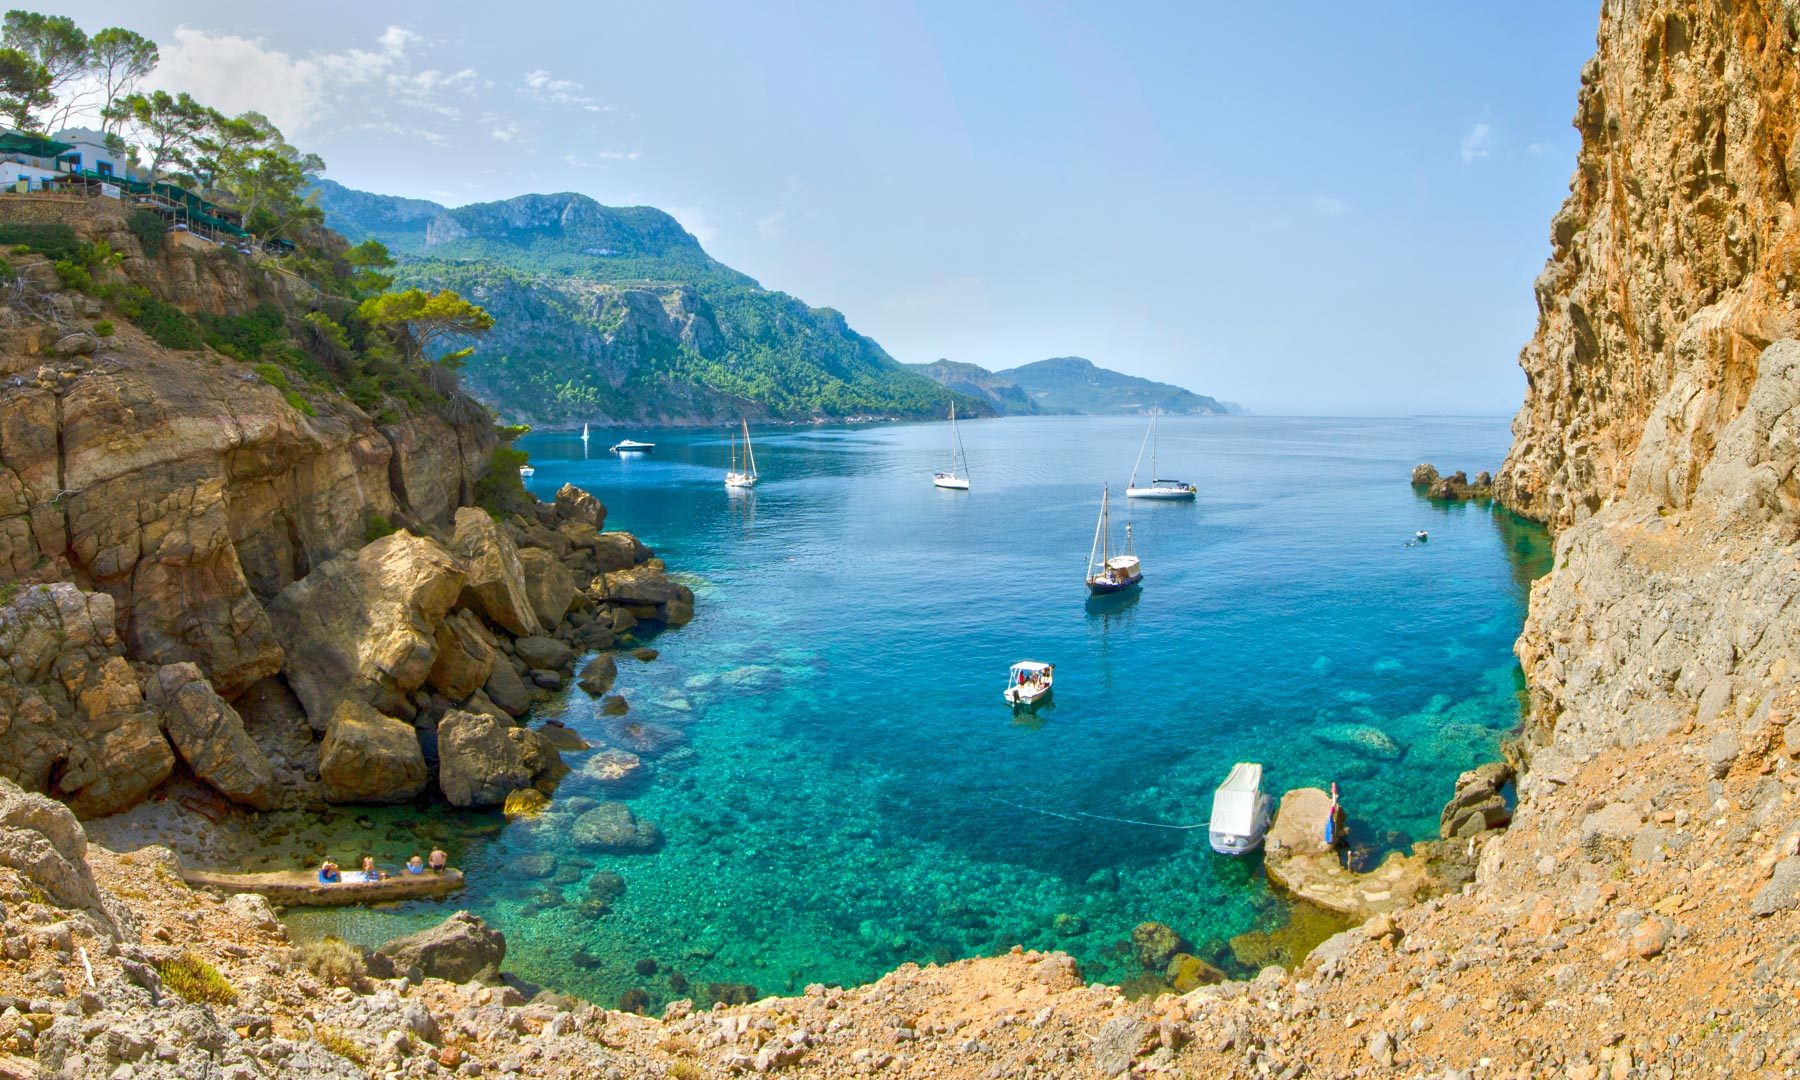 The Best Things to do in Majorca, Spain